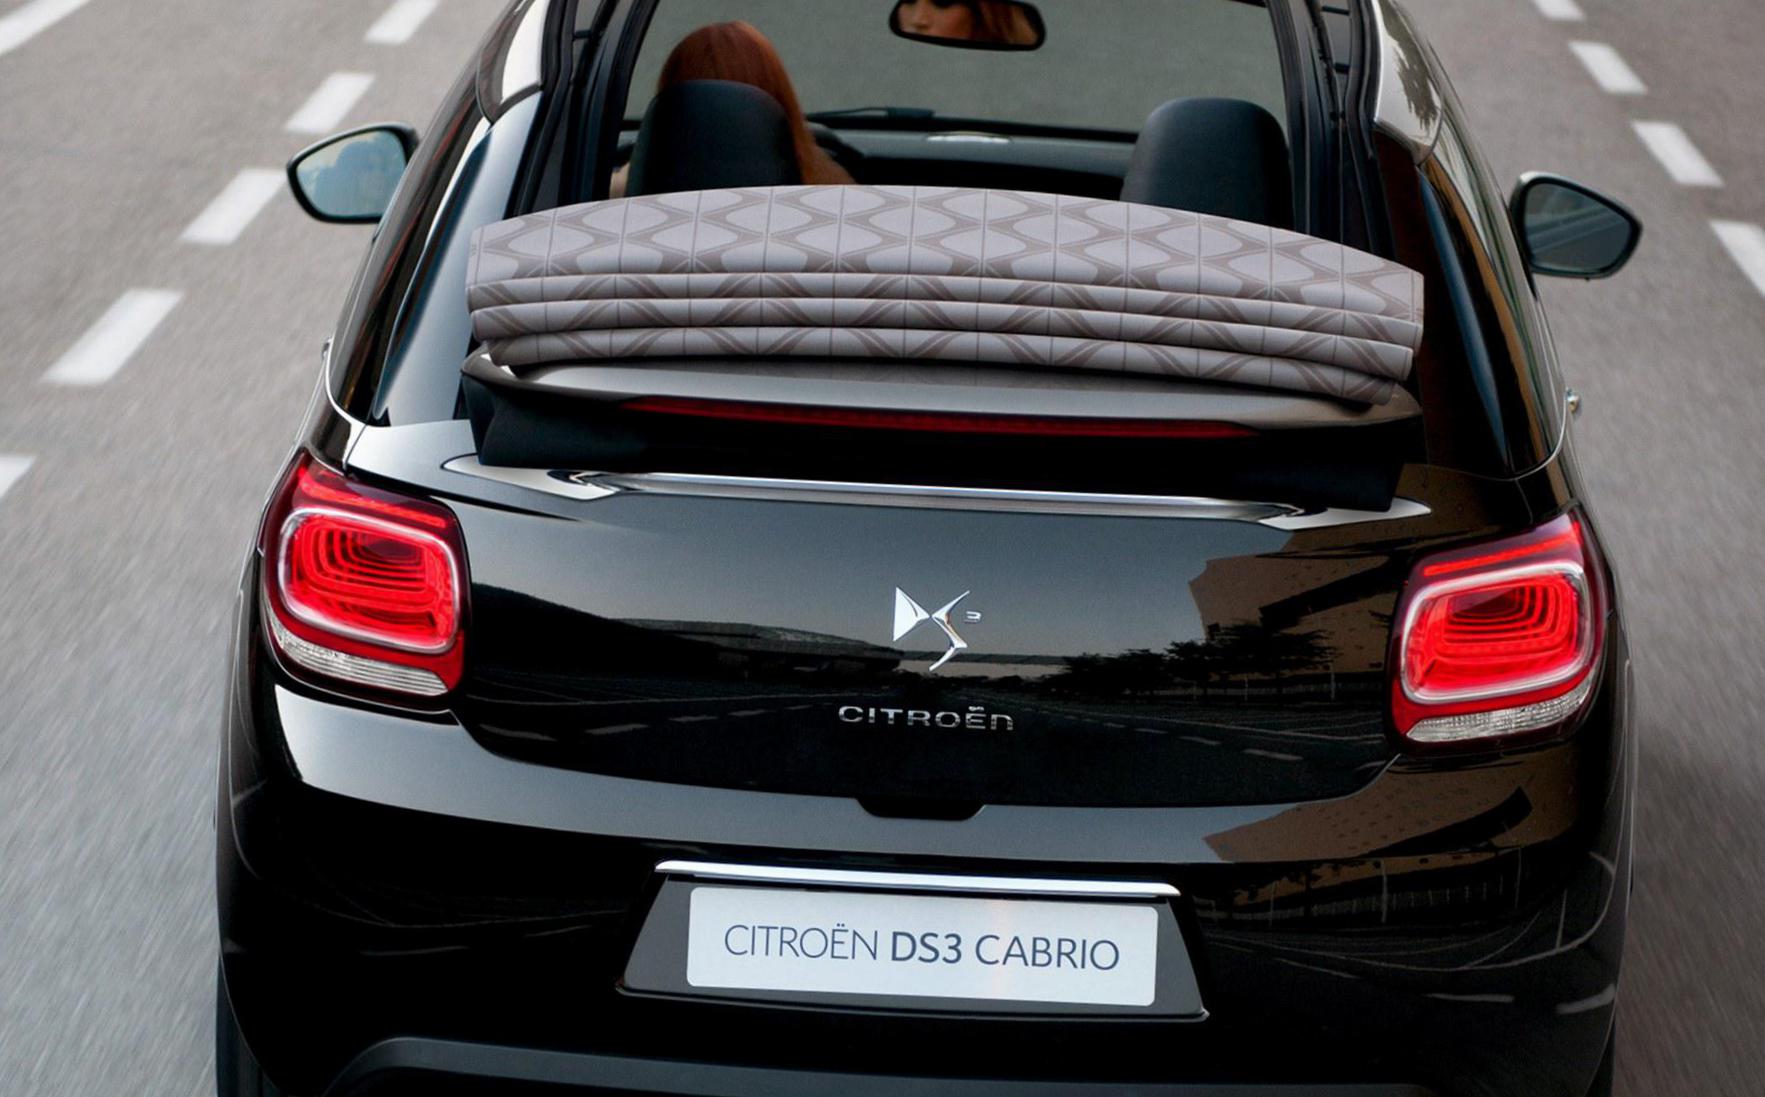 Citroen DS3 Cabrio approved hatchback